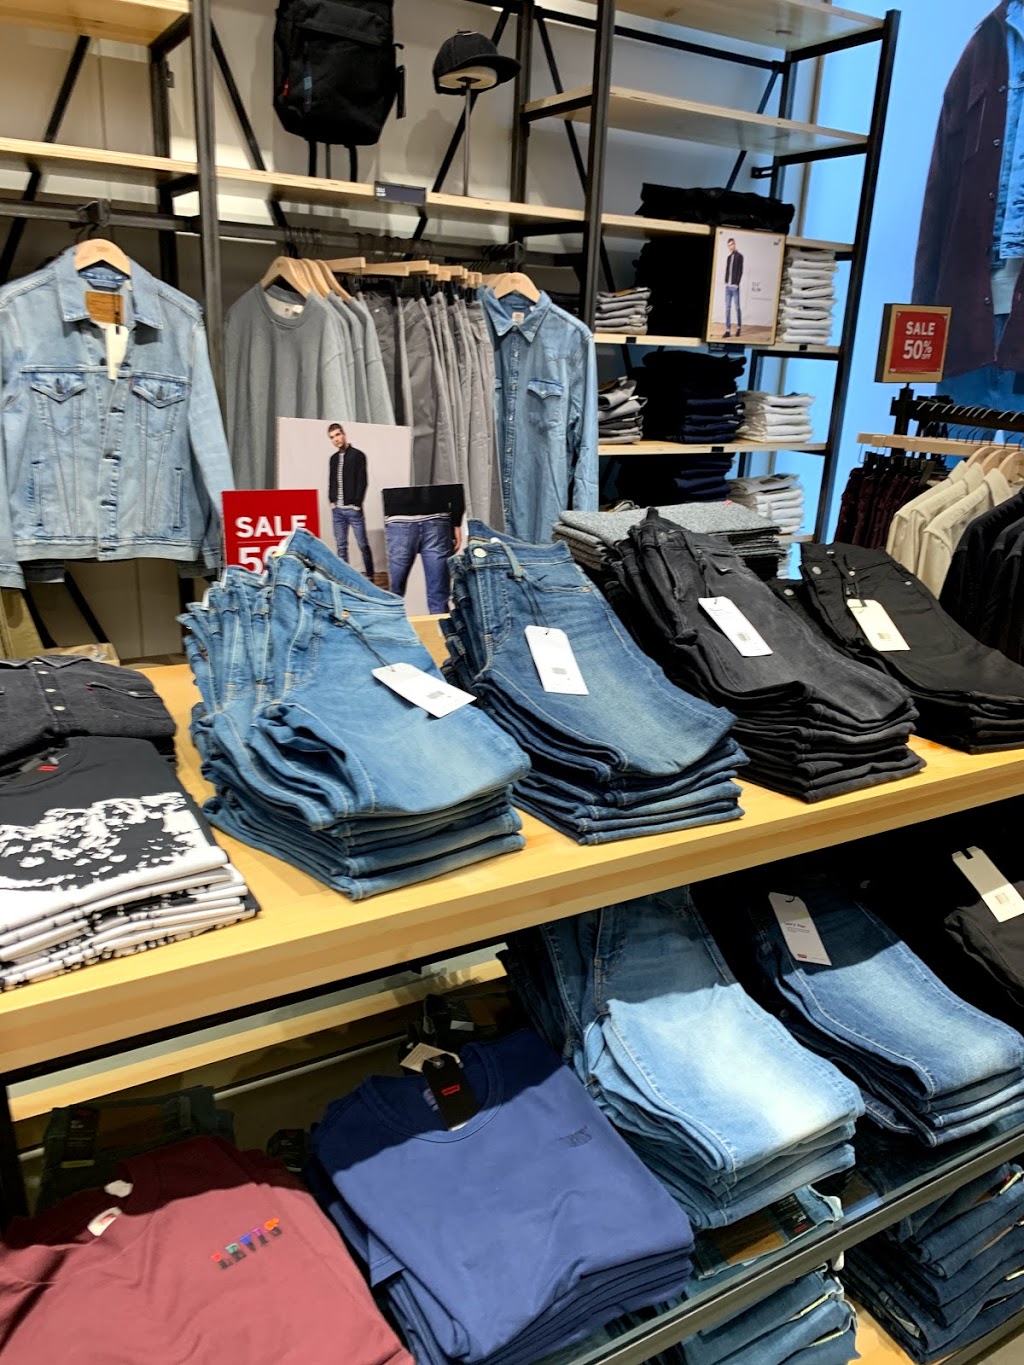 Levi’s Store | 1 American Dream Way Space D118, East Rutherford, NJ 07073, USA | Phone: (551) 213-6200